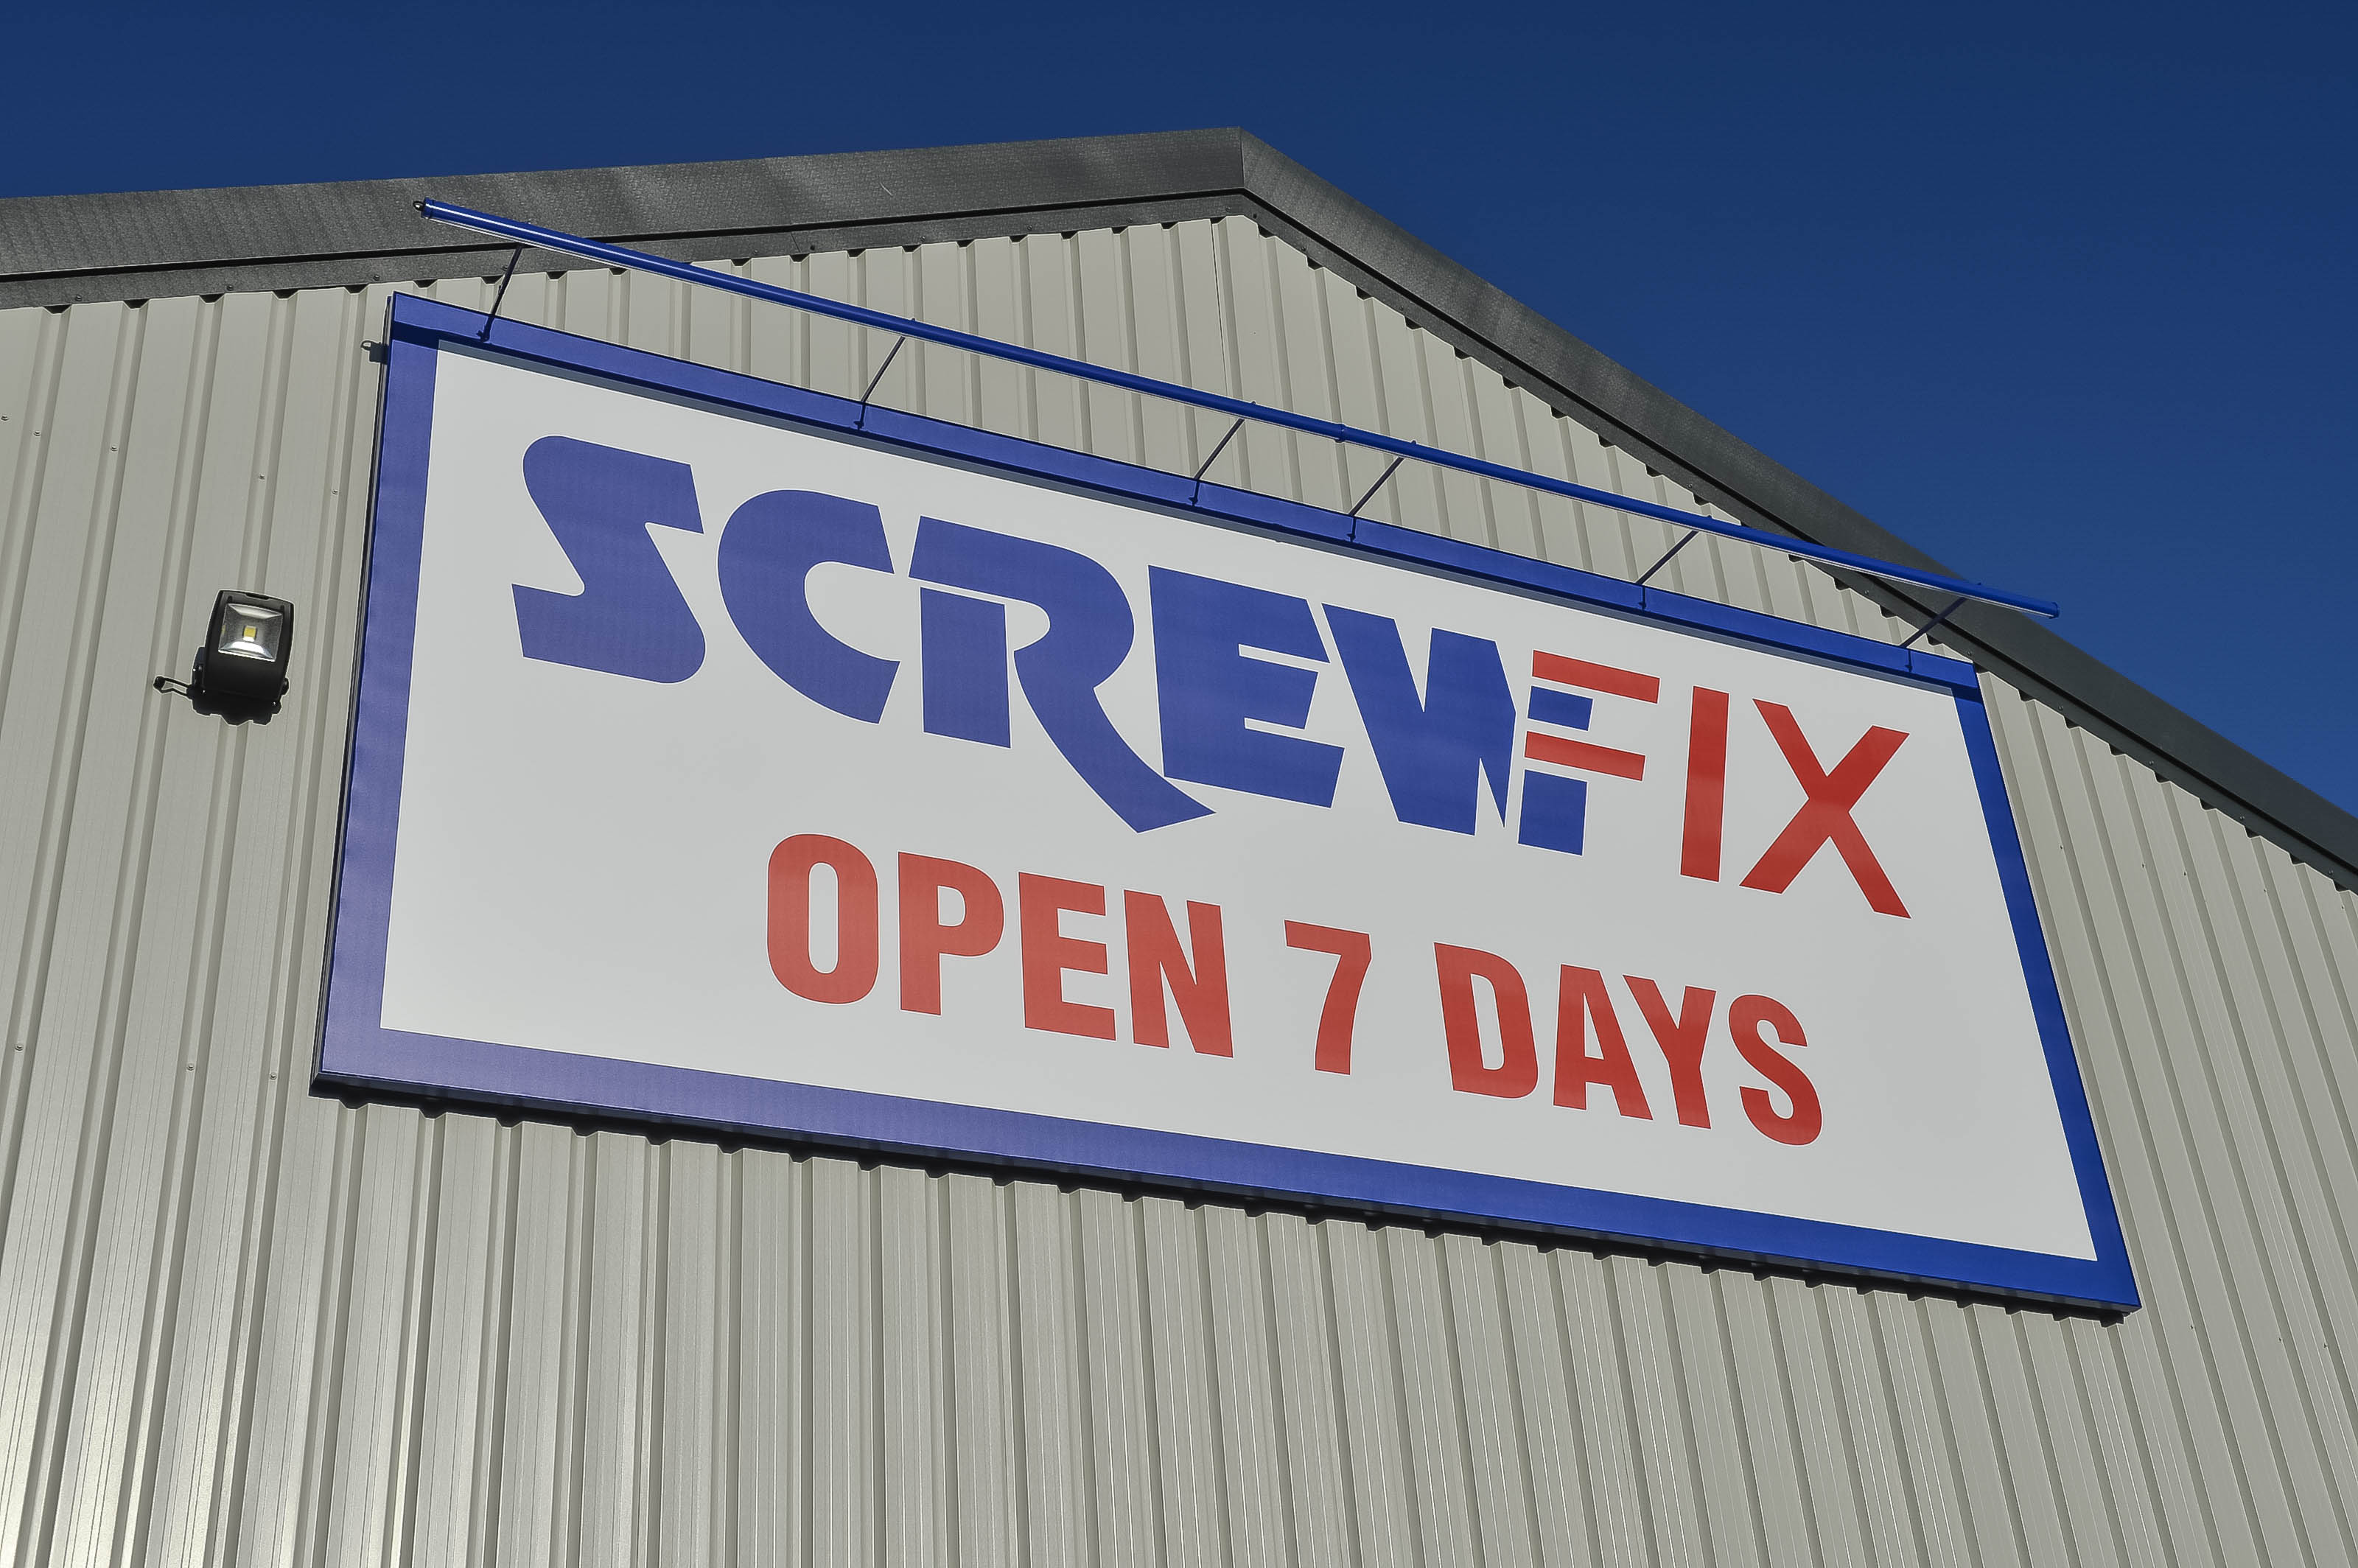 Bayswater to welcome new Screwfix store